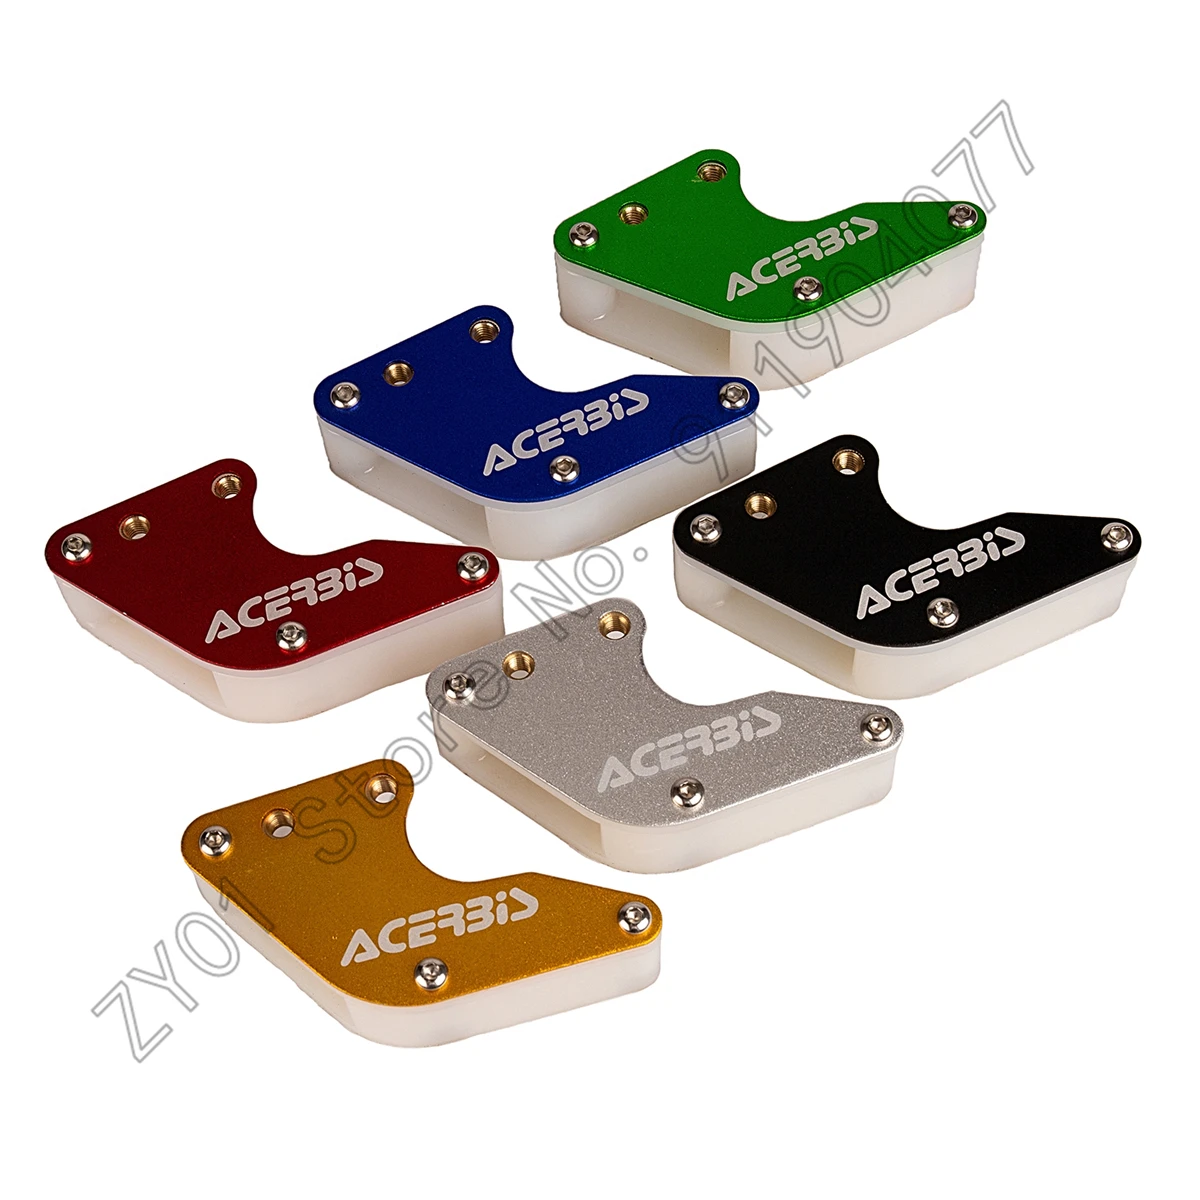 Motorcycle Aluminum Chain Guard Guide For IRBIS BSE KAYO SSR TTR XR CRF KLX 50 70 90 110 125 140 150 160 cc Dirt Pit Bike